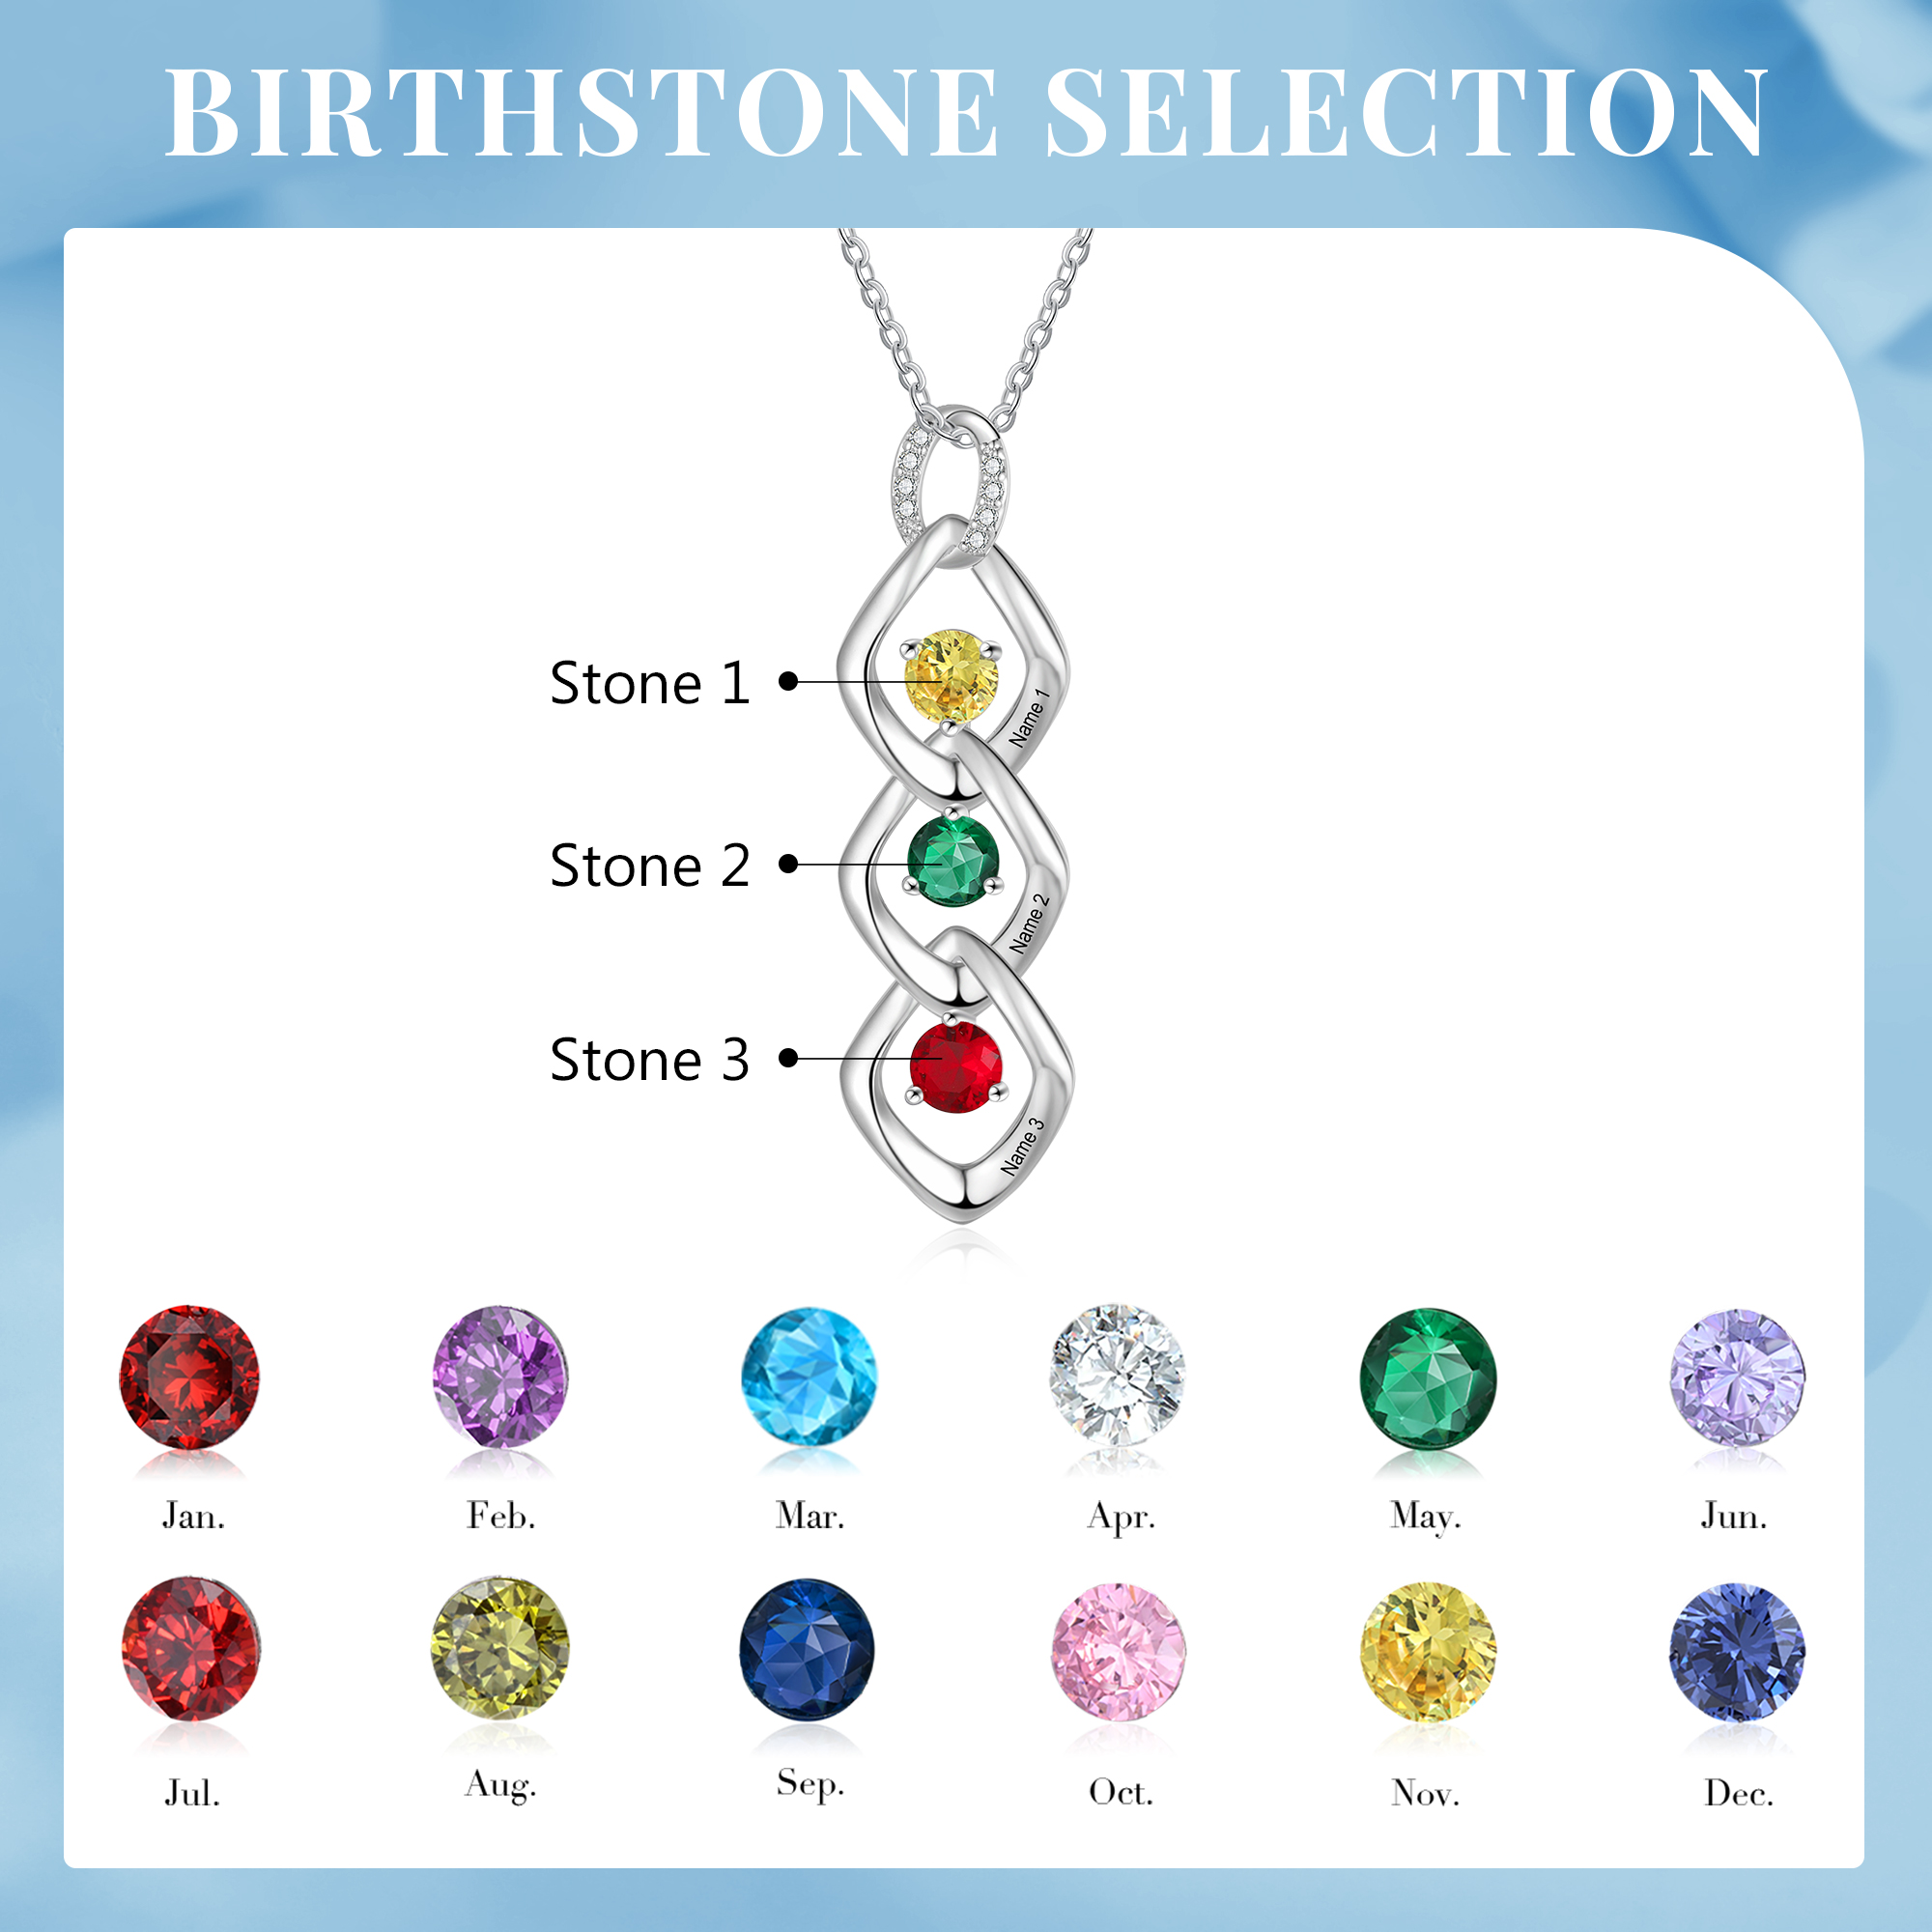 3 Names - Personalized Birthstone Necklace With Name Engraved For A Special Gift For Mom/Grandma